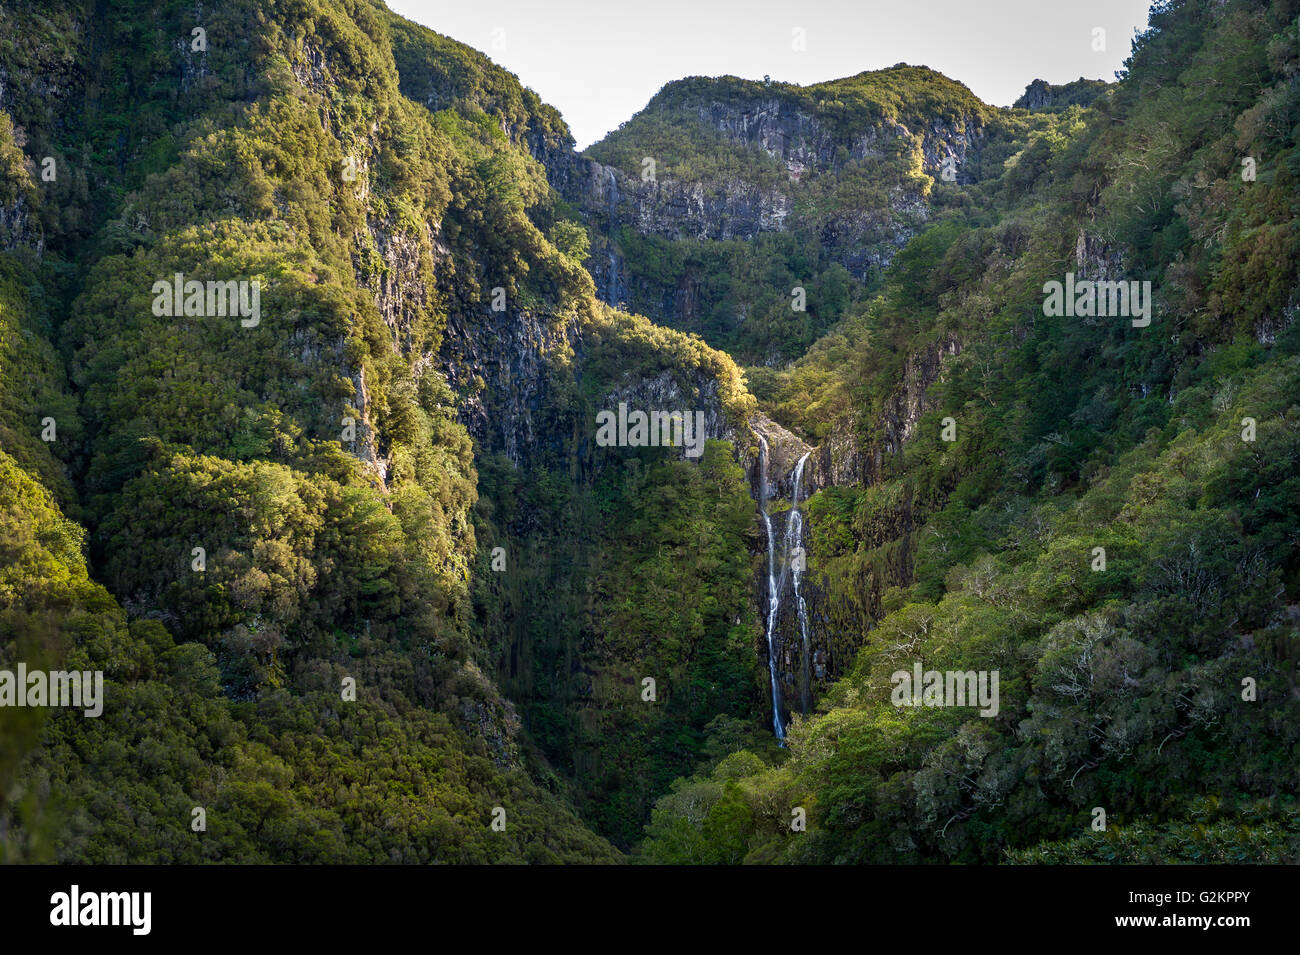 High waterfall in the hiking route levada 25 fountains, Madeira. Stock Photo